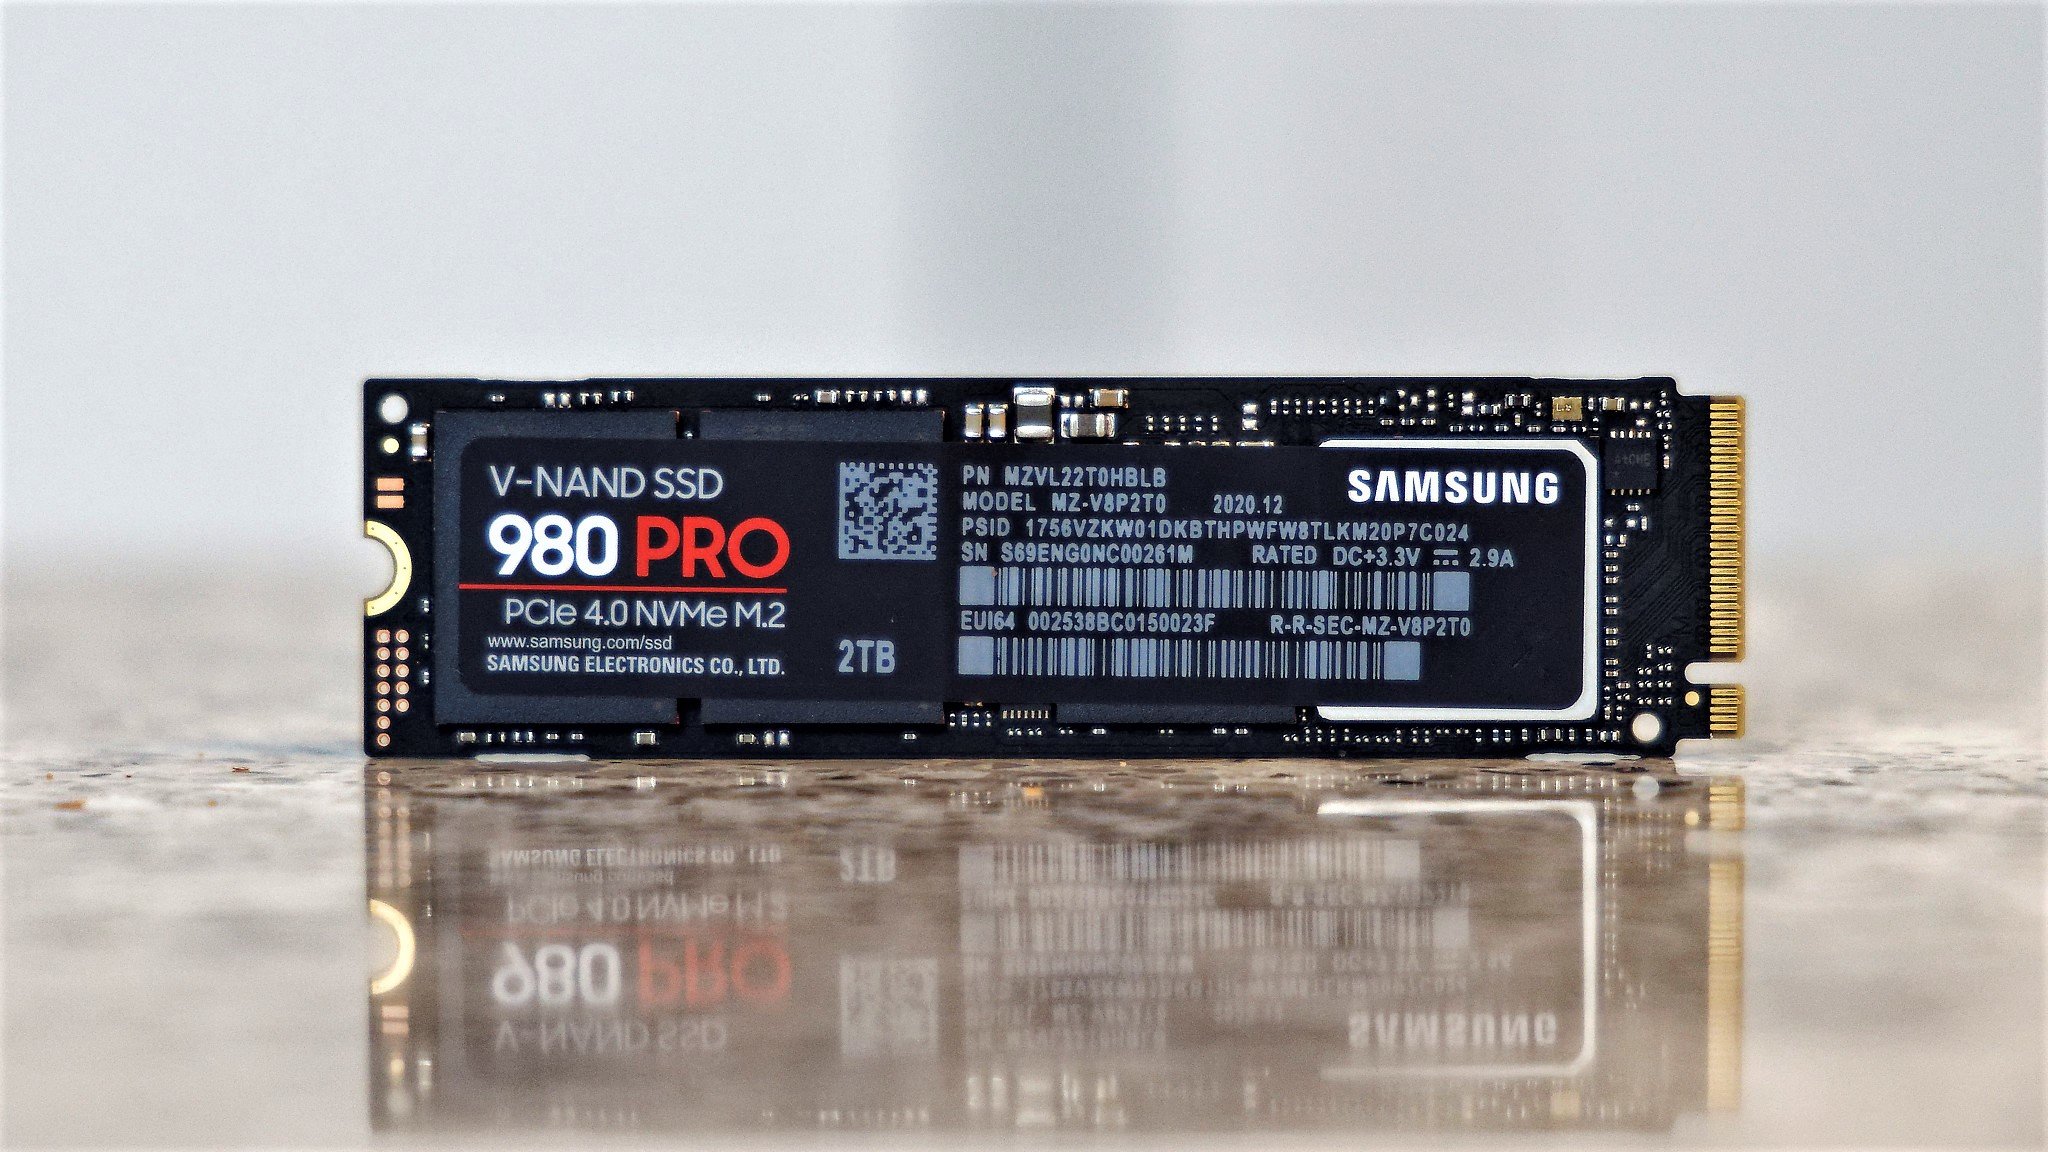 Samsung 980 Pro Gen4 2TB NVMe M.2 SSD Review - The Bigger They Get